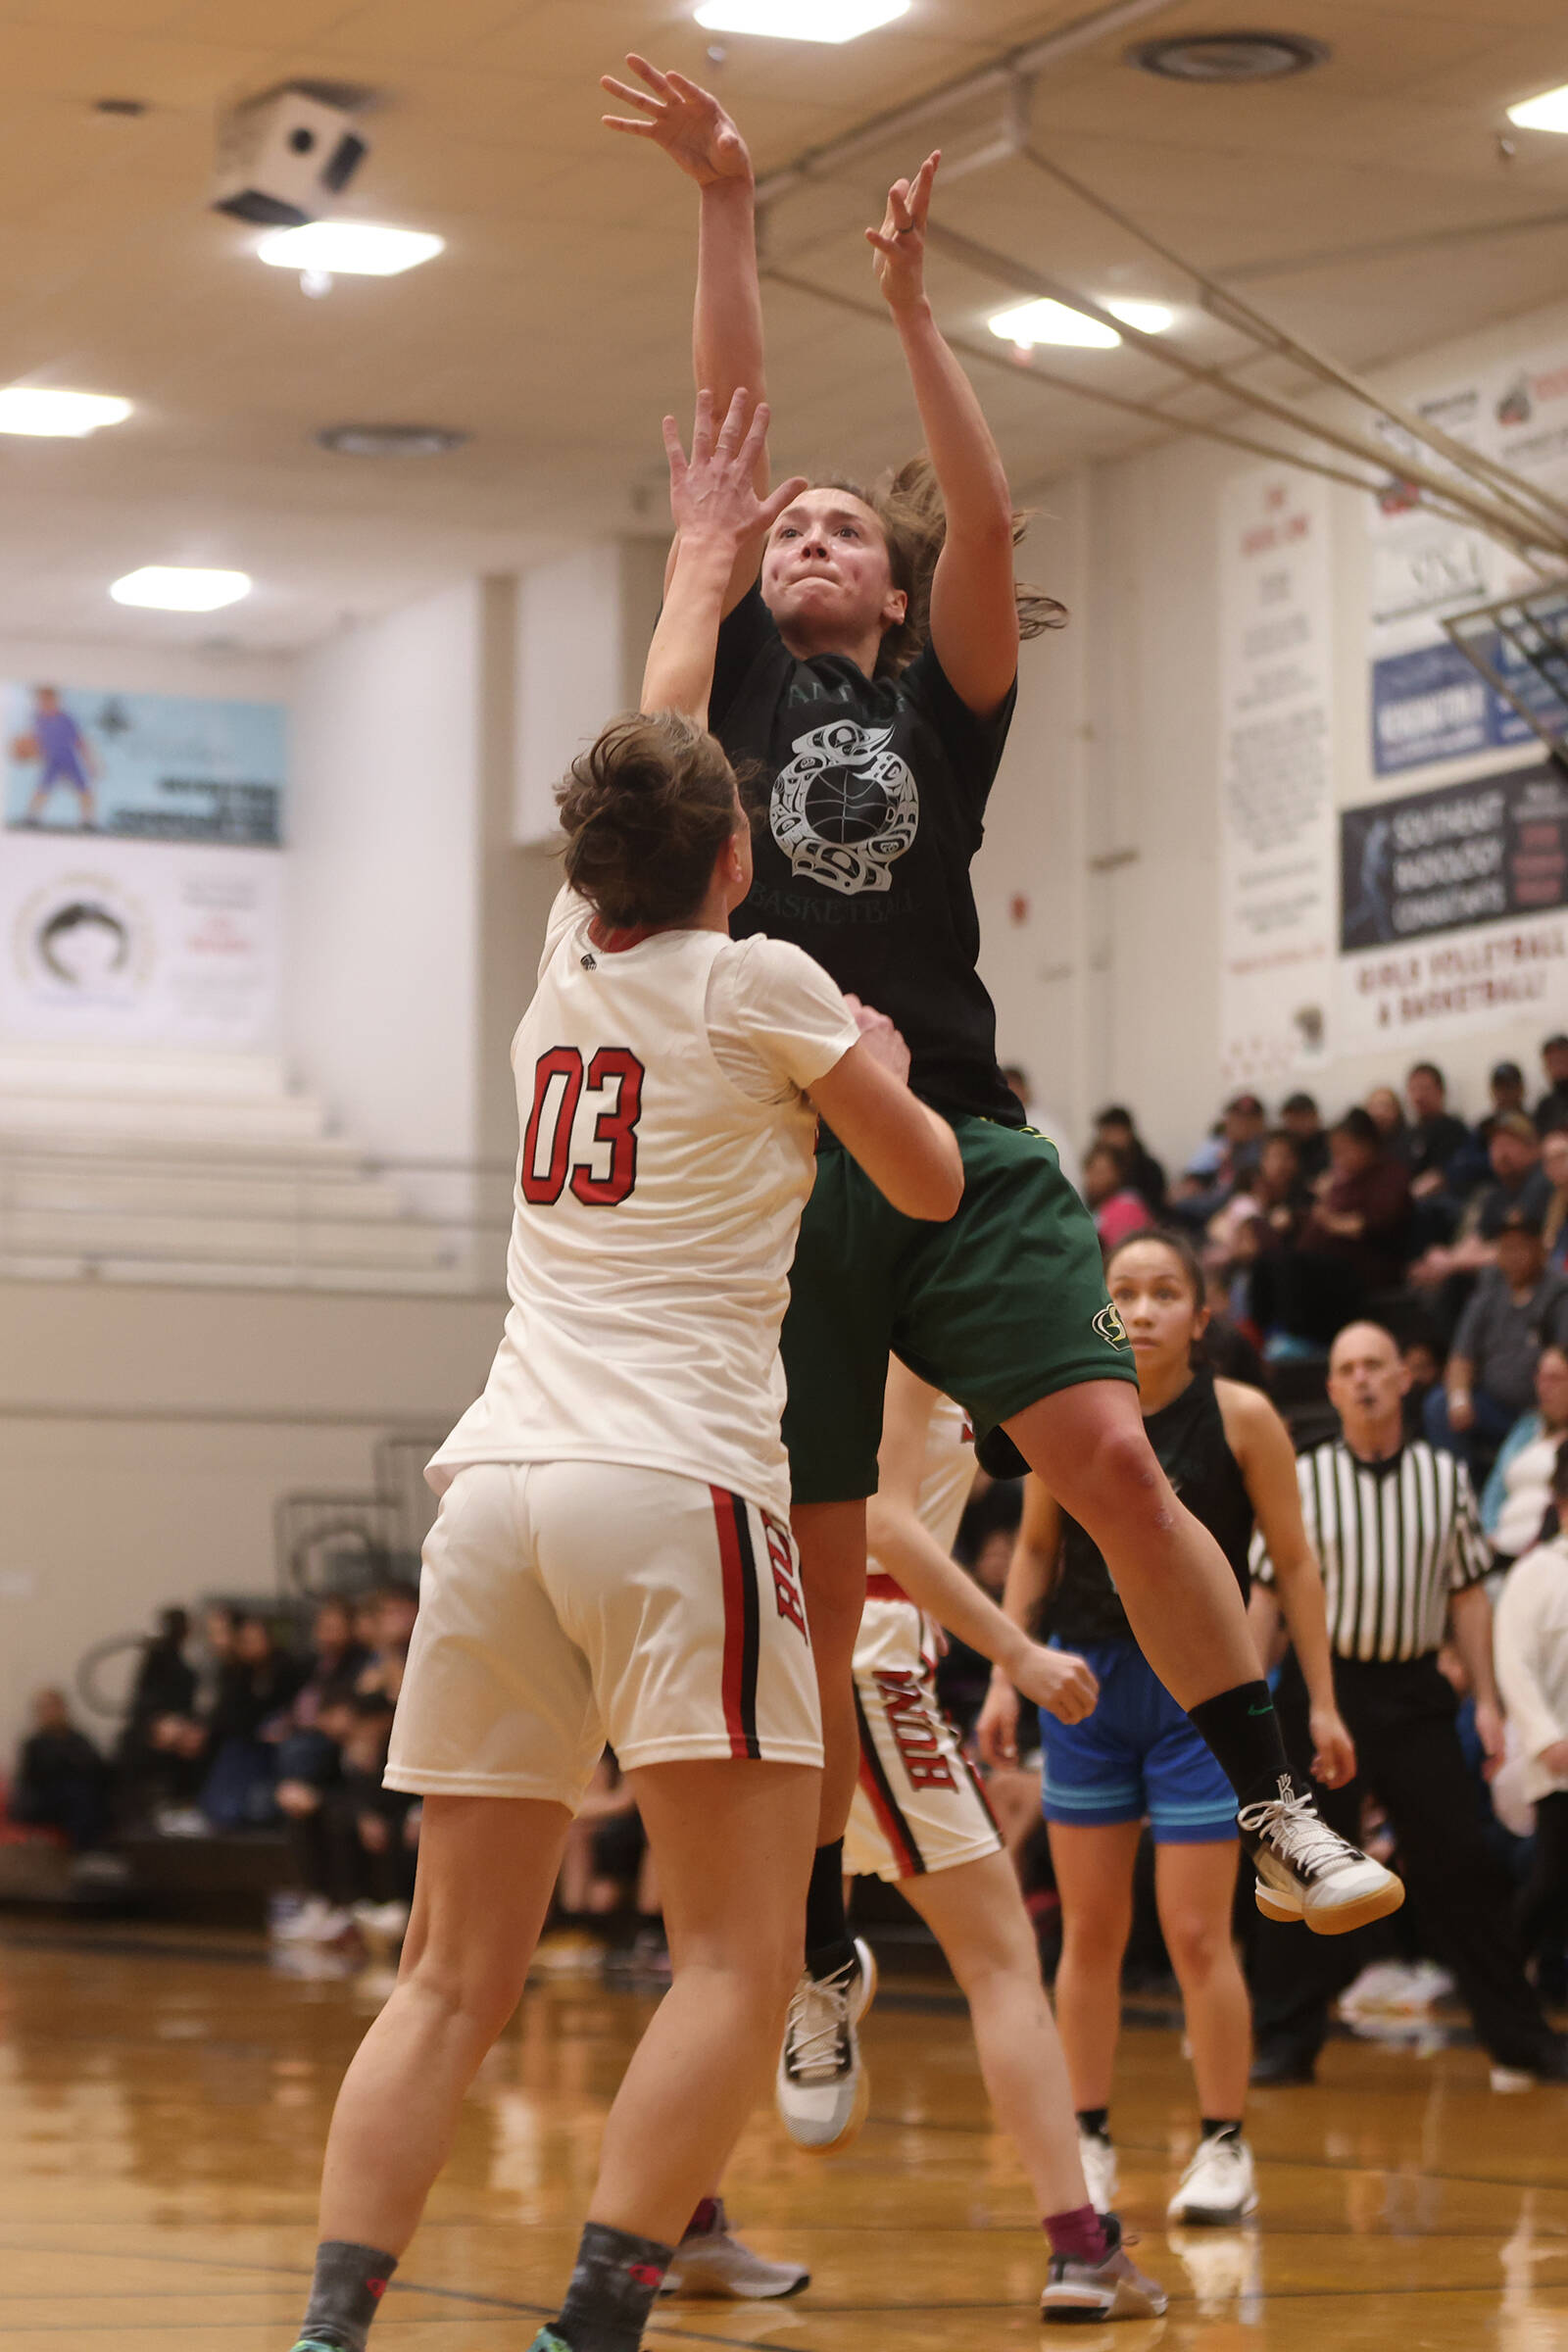 Prince of Wales’ Nani Weimer shoots over Hoonah’s Tanya Nizich (3) during a Prince of Wales win in the women’s bracket of the Gold Medal Basketball Tournament. The Prince of Wales-Hoonah game was the last game of the tournament’s second day. (Ben Hohenstatt / Juneau Empire)